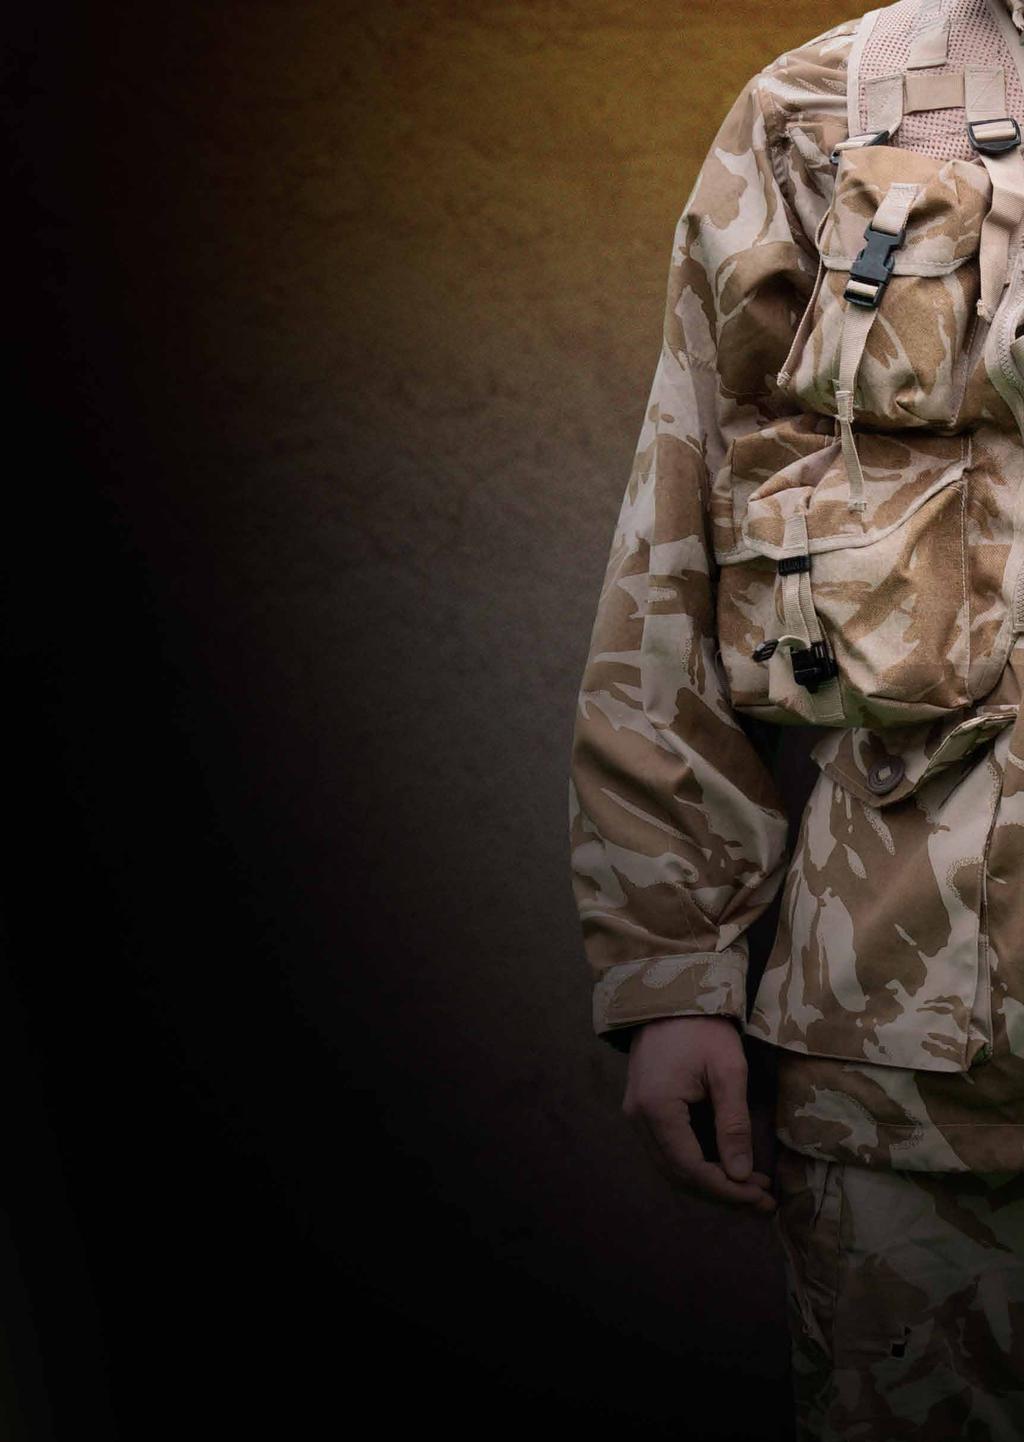 A BRAVE FACE TRIGGER & SAFETY SHEET FOR VETERANS AND SERVICE PERSONnEL» The Trigger and Safety Sheet pre-warns audience members about show content and themes, helping to minimise potential triggers